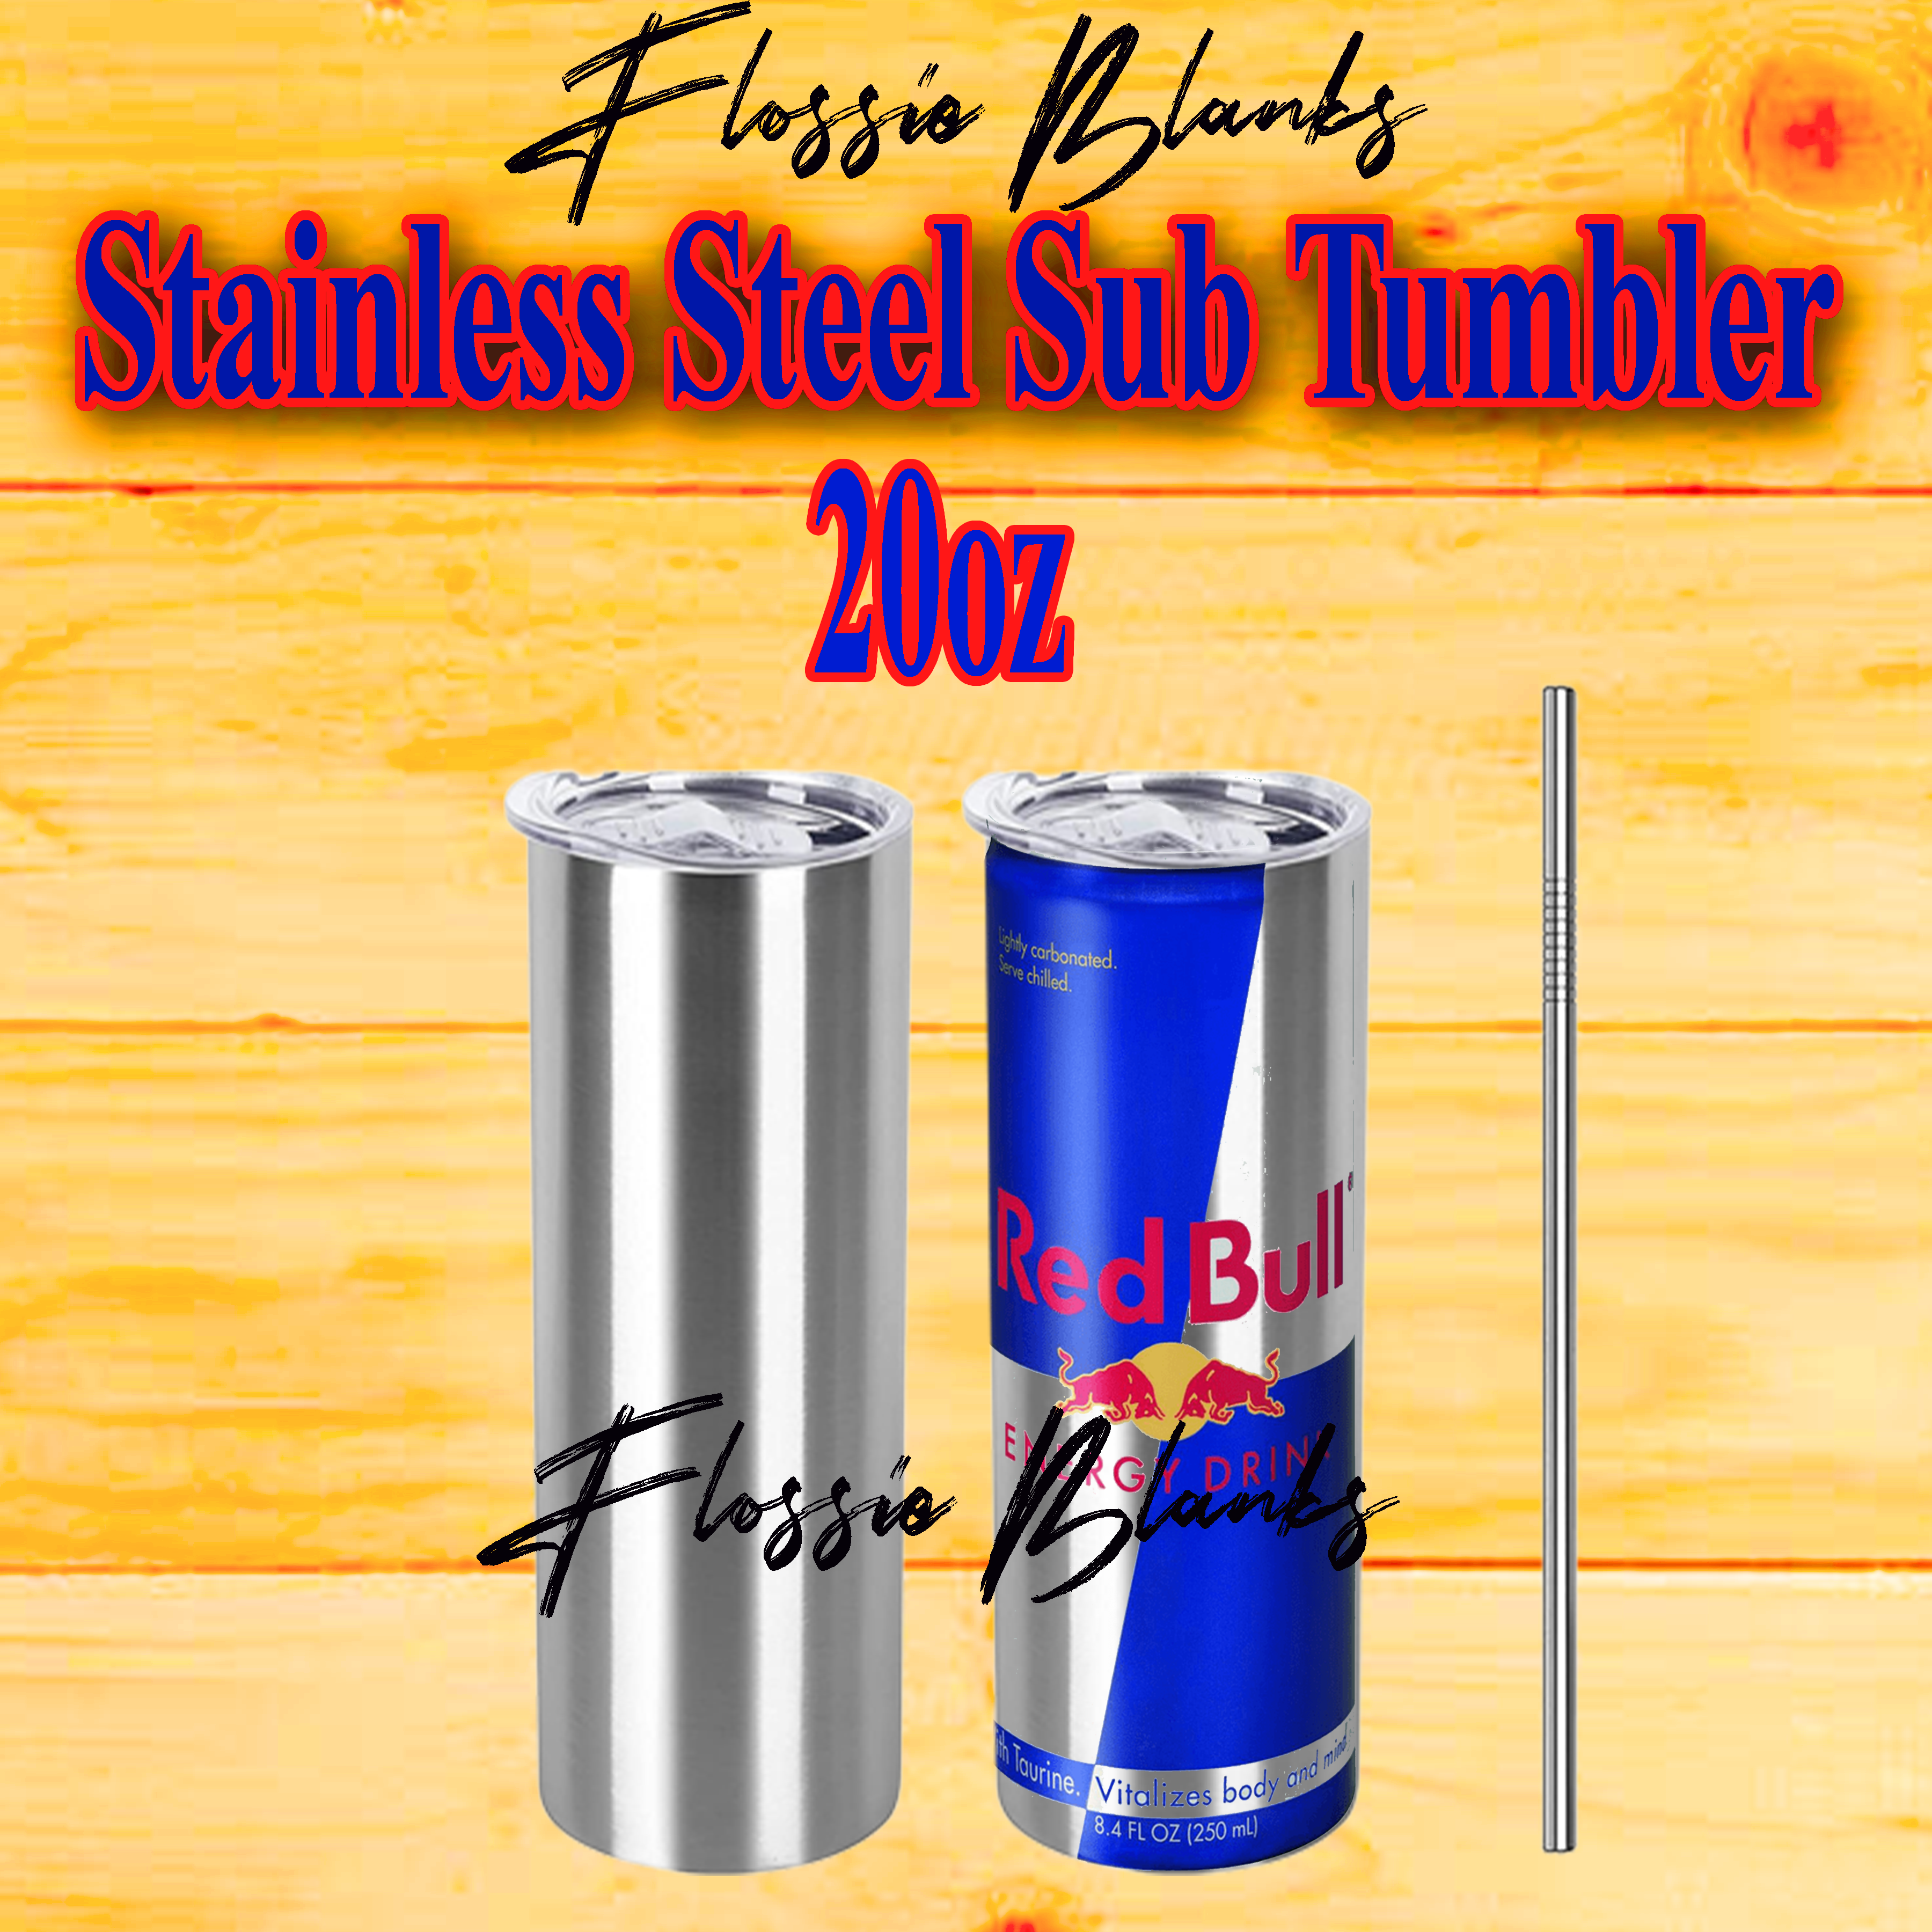 20oz Stainless Steel Sublimation Tumblers (BLANK) – Flossie Blanks